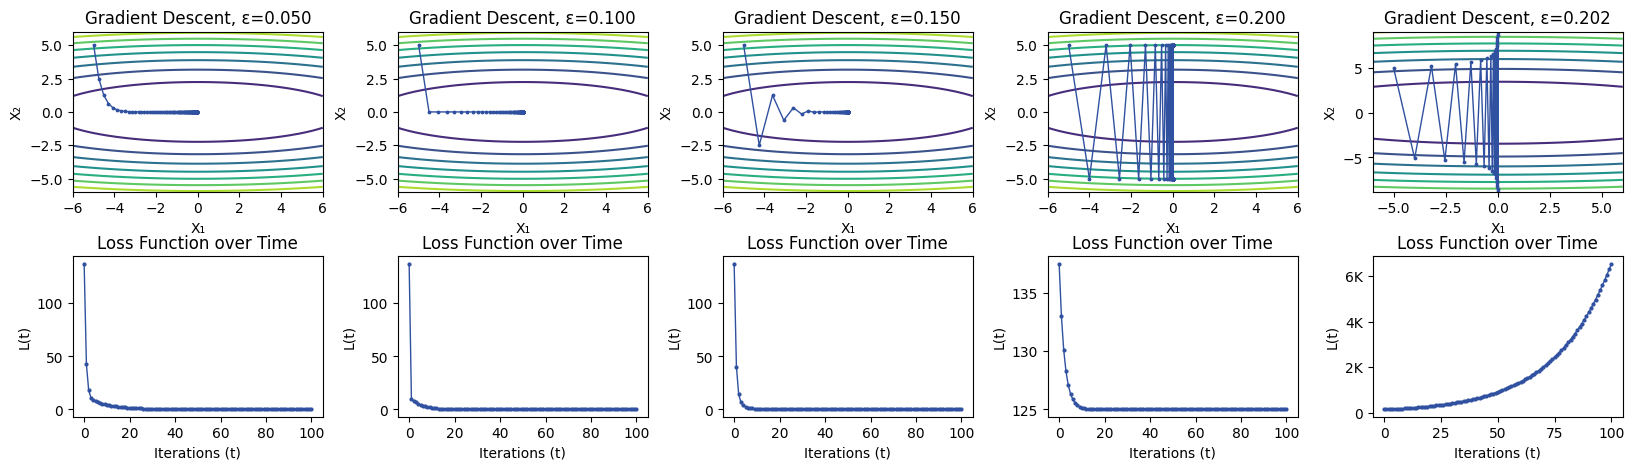 A series of contour plots showcasing the results of different values of epsilon on the results of gradient descent